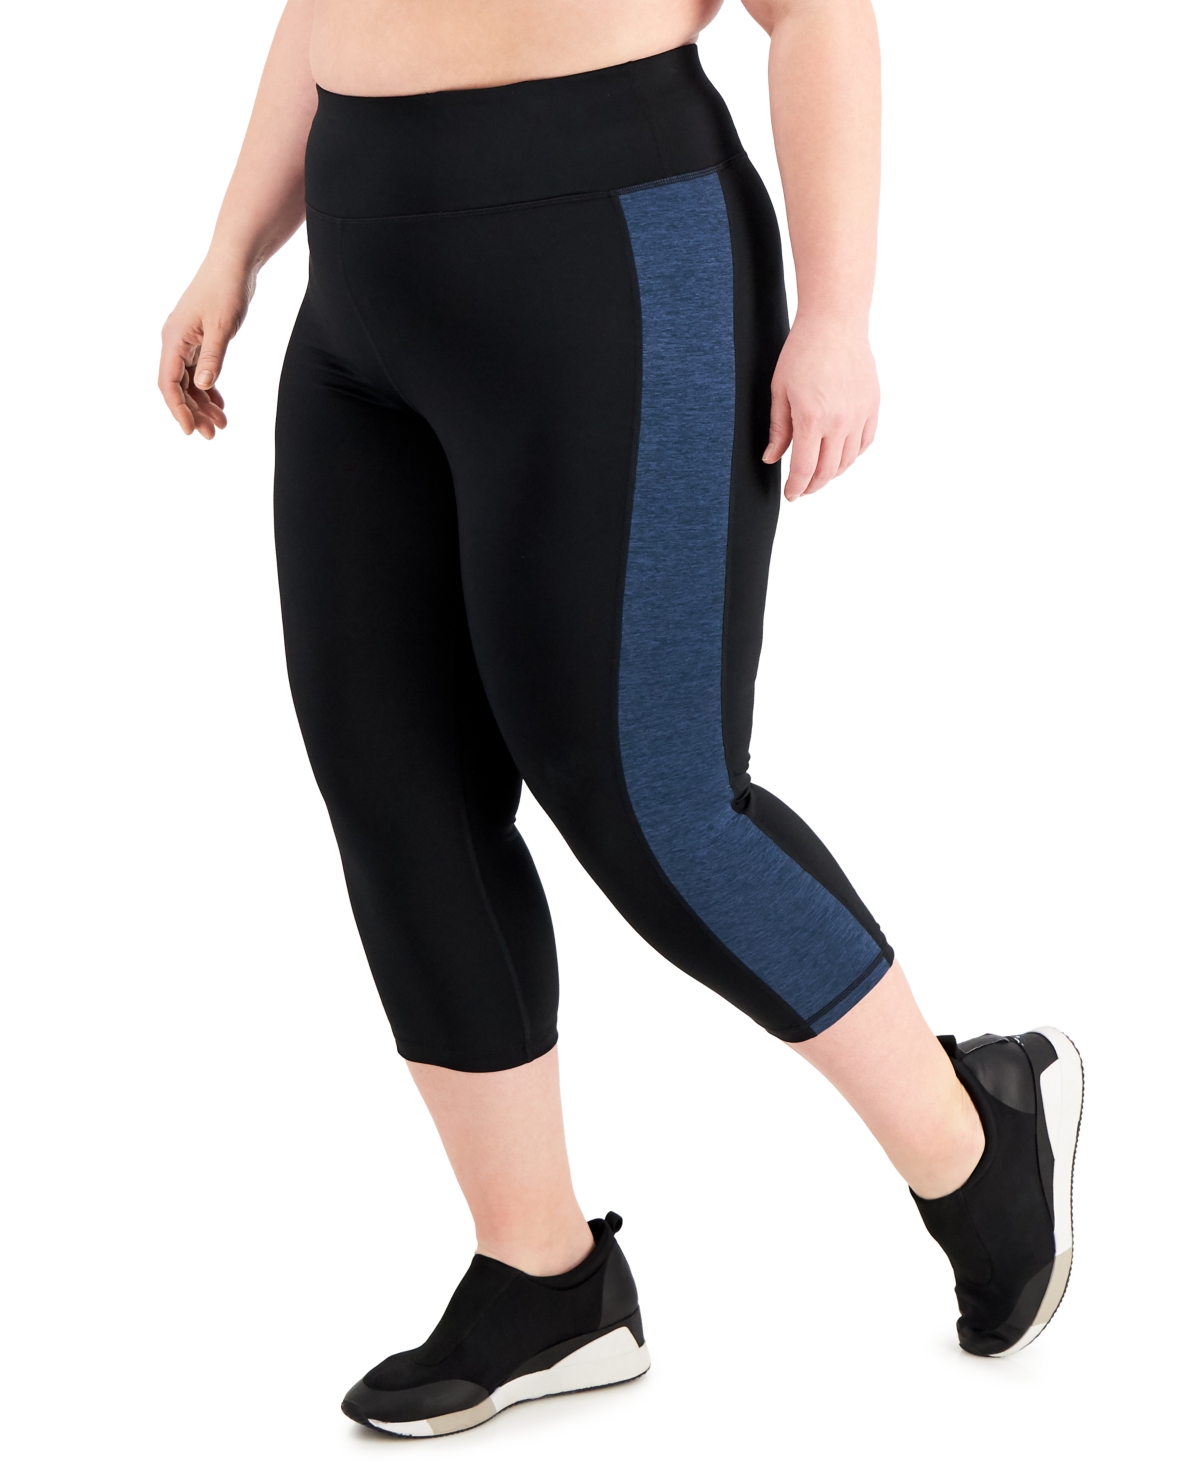 Id Ideology Plus Size Colorblocked Capri Leggings, Created for